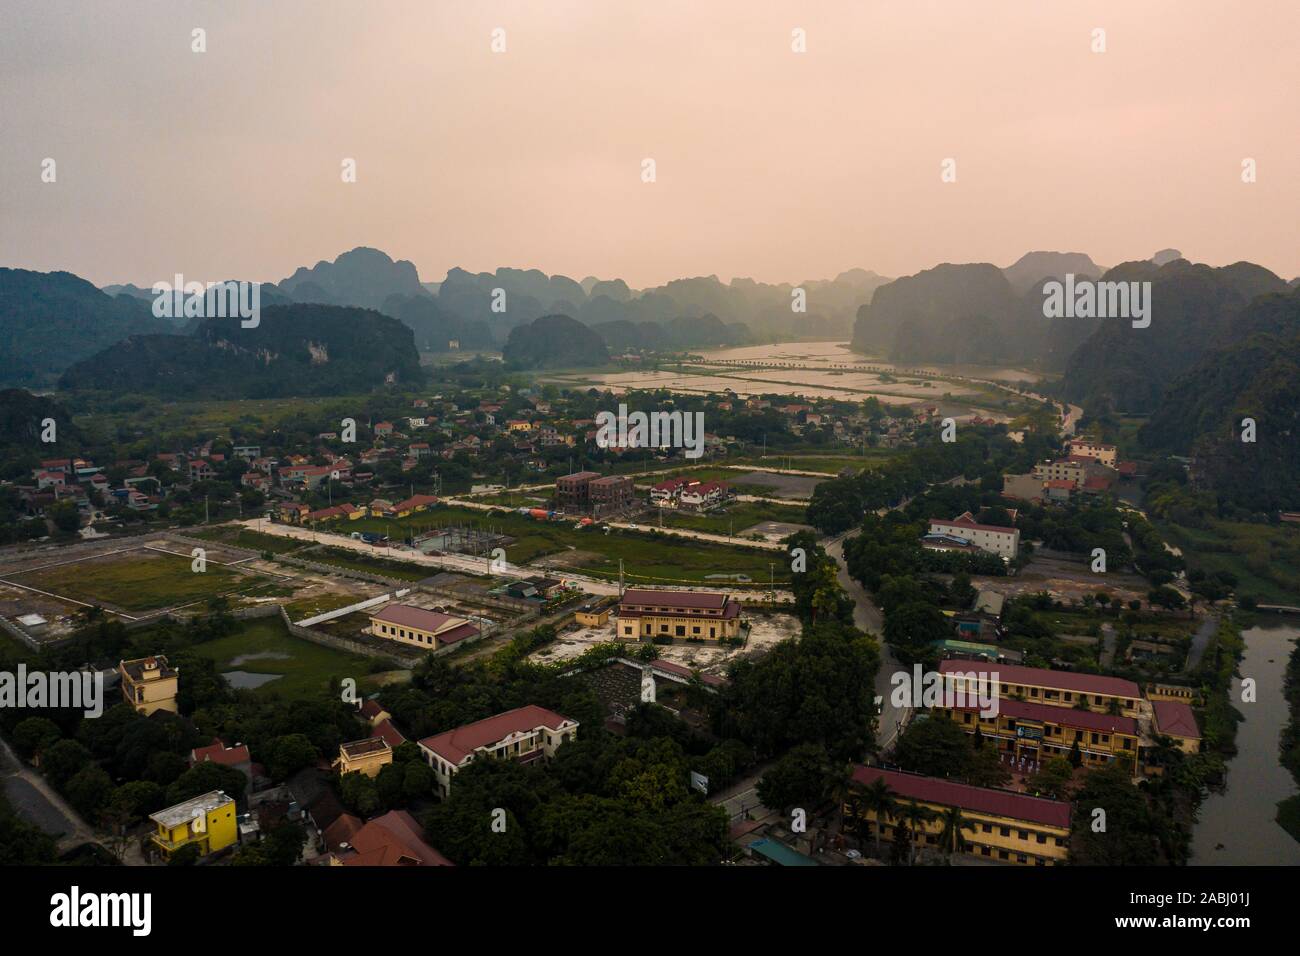 Aerial view of Tam Coc near Ninh Binh at sunset in Northern Vietnam, Asia. Stock Photo